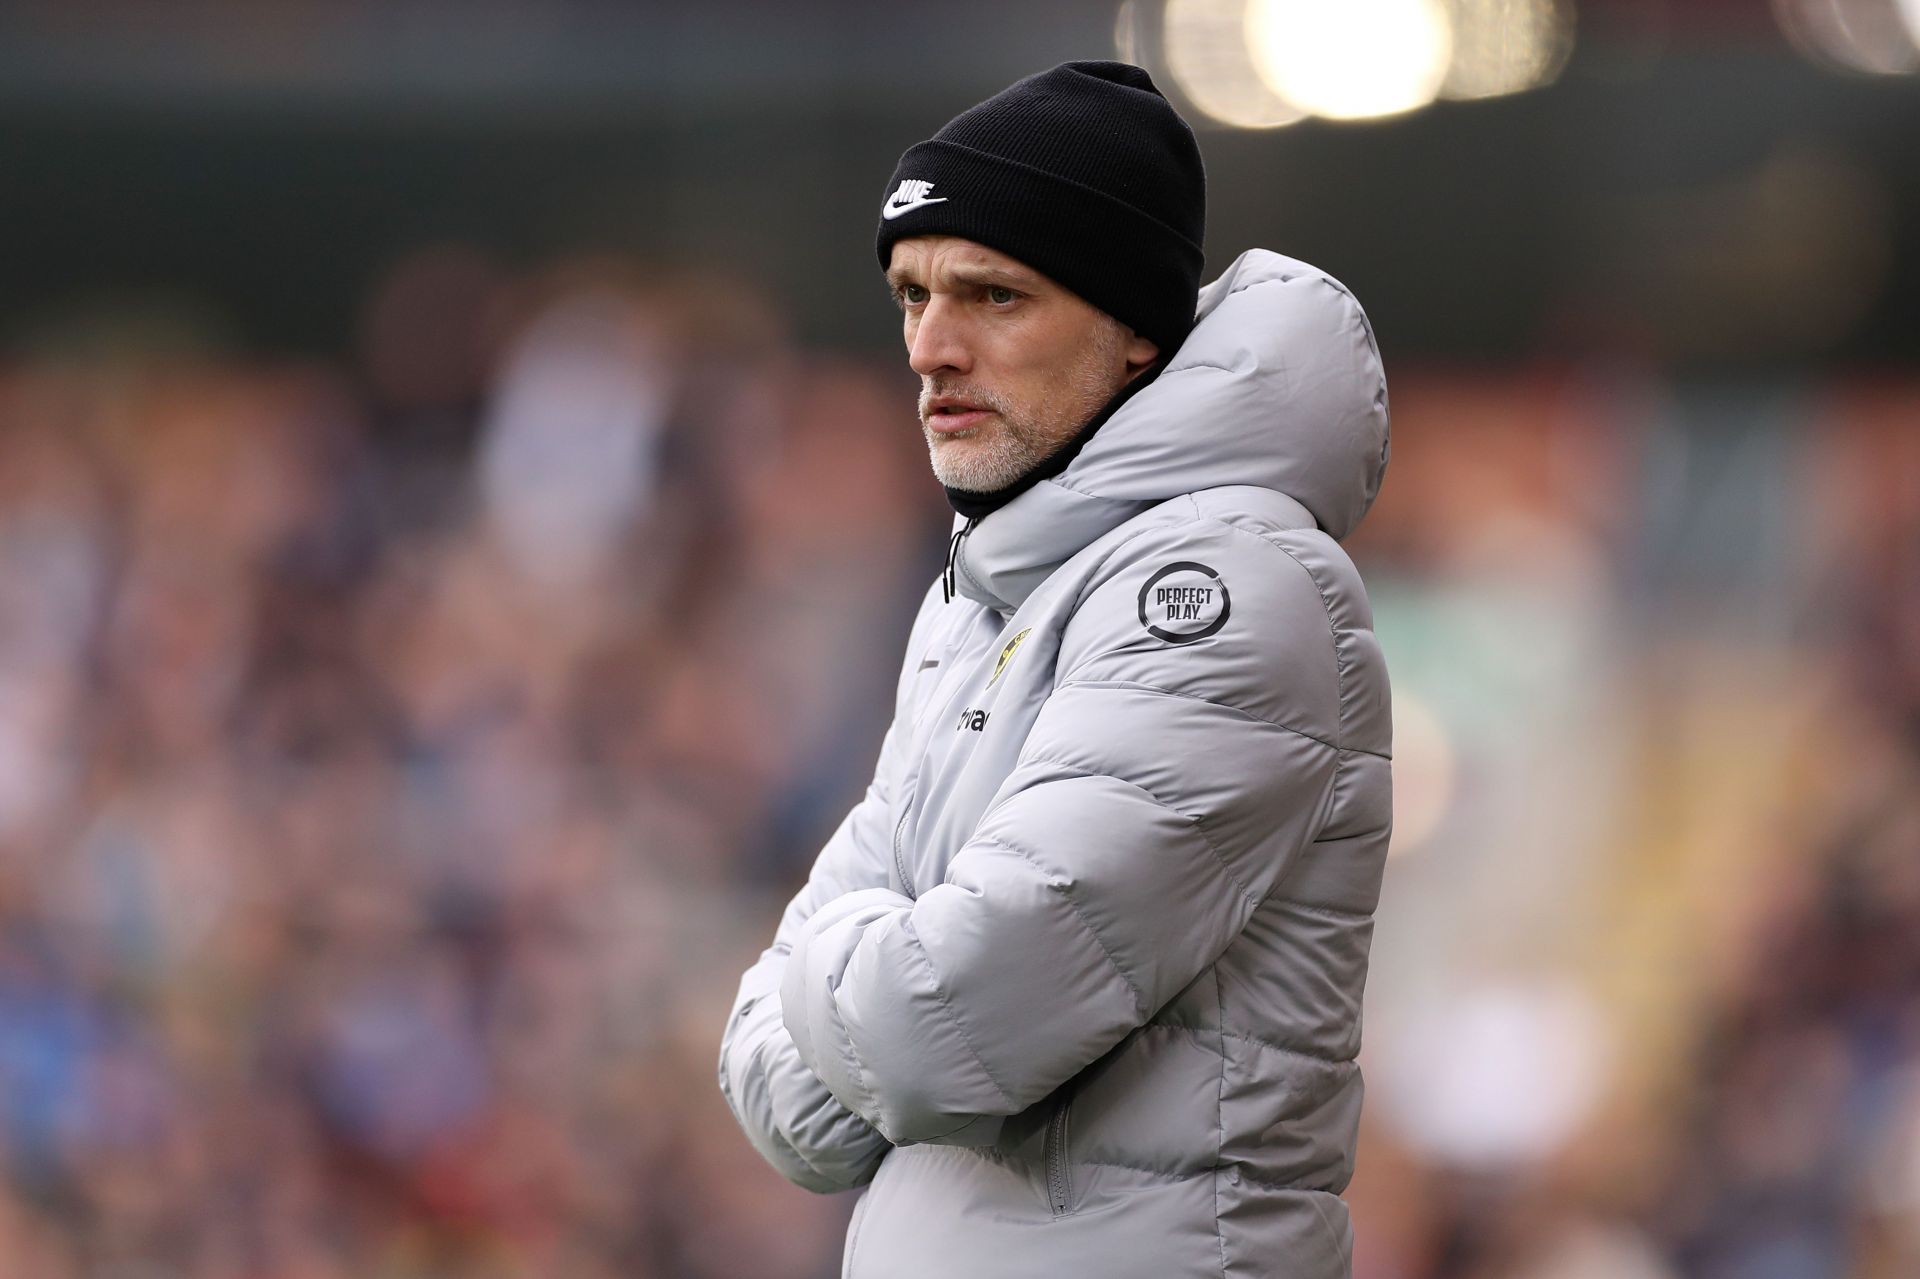 Chelsea manager Thomas Tuchel is planning to get the better of Real Madrid